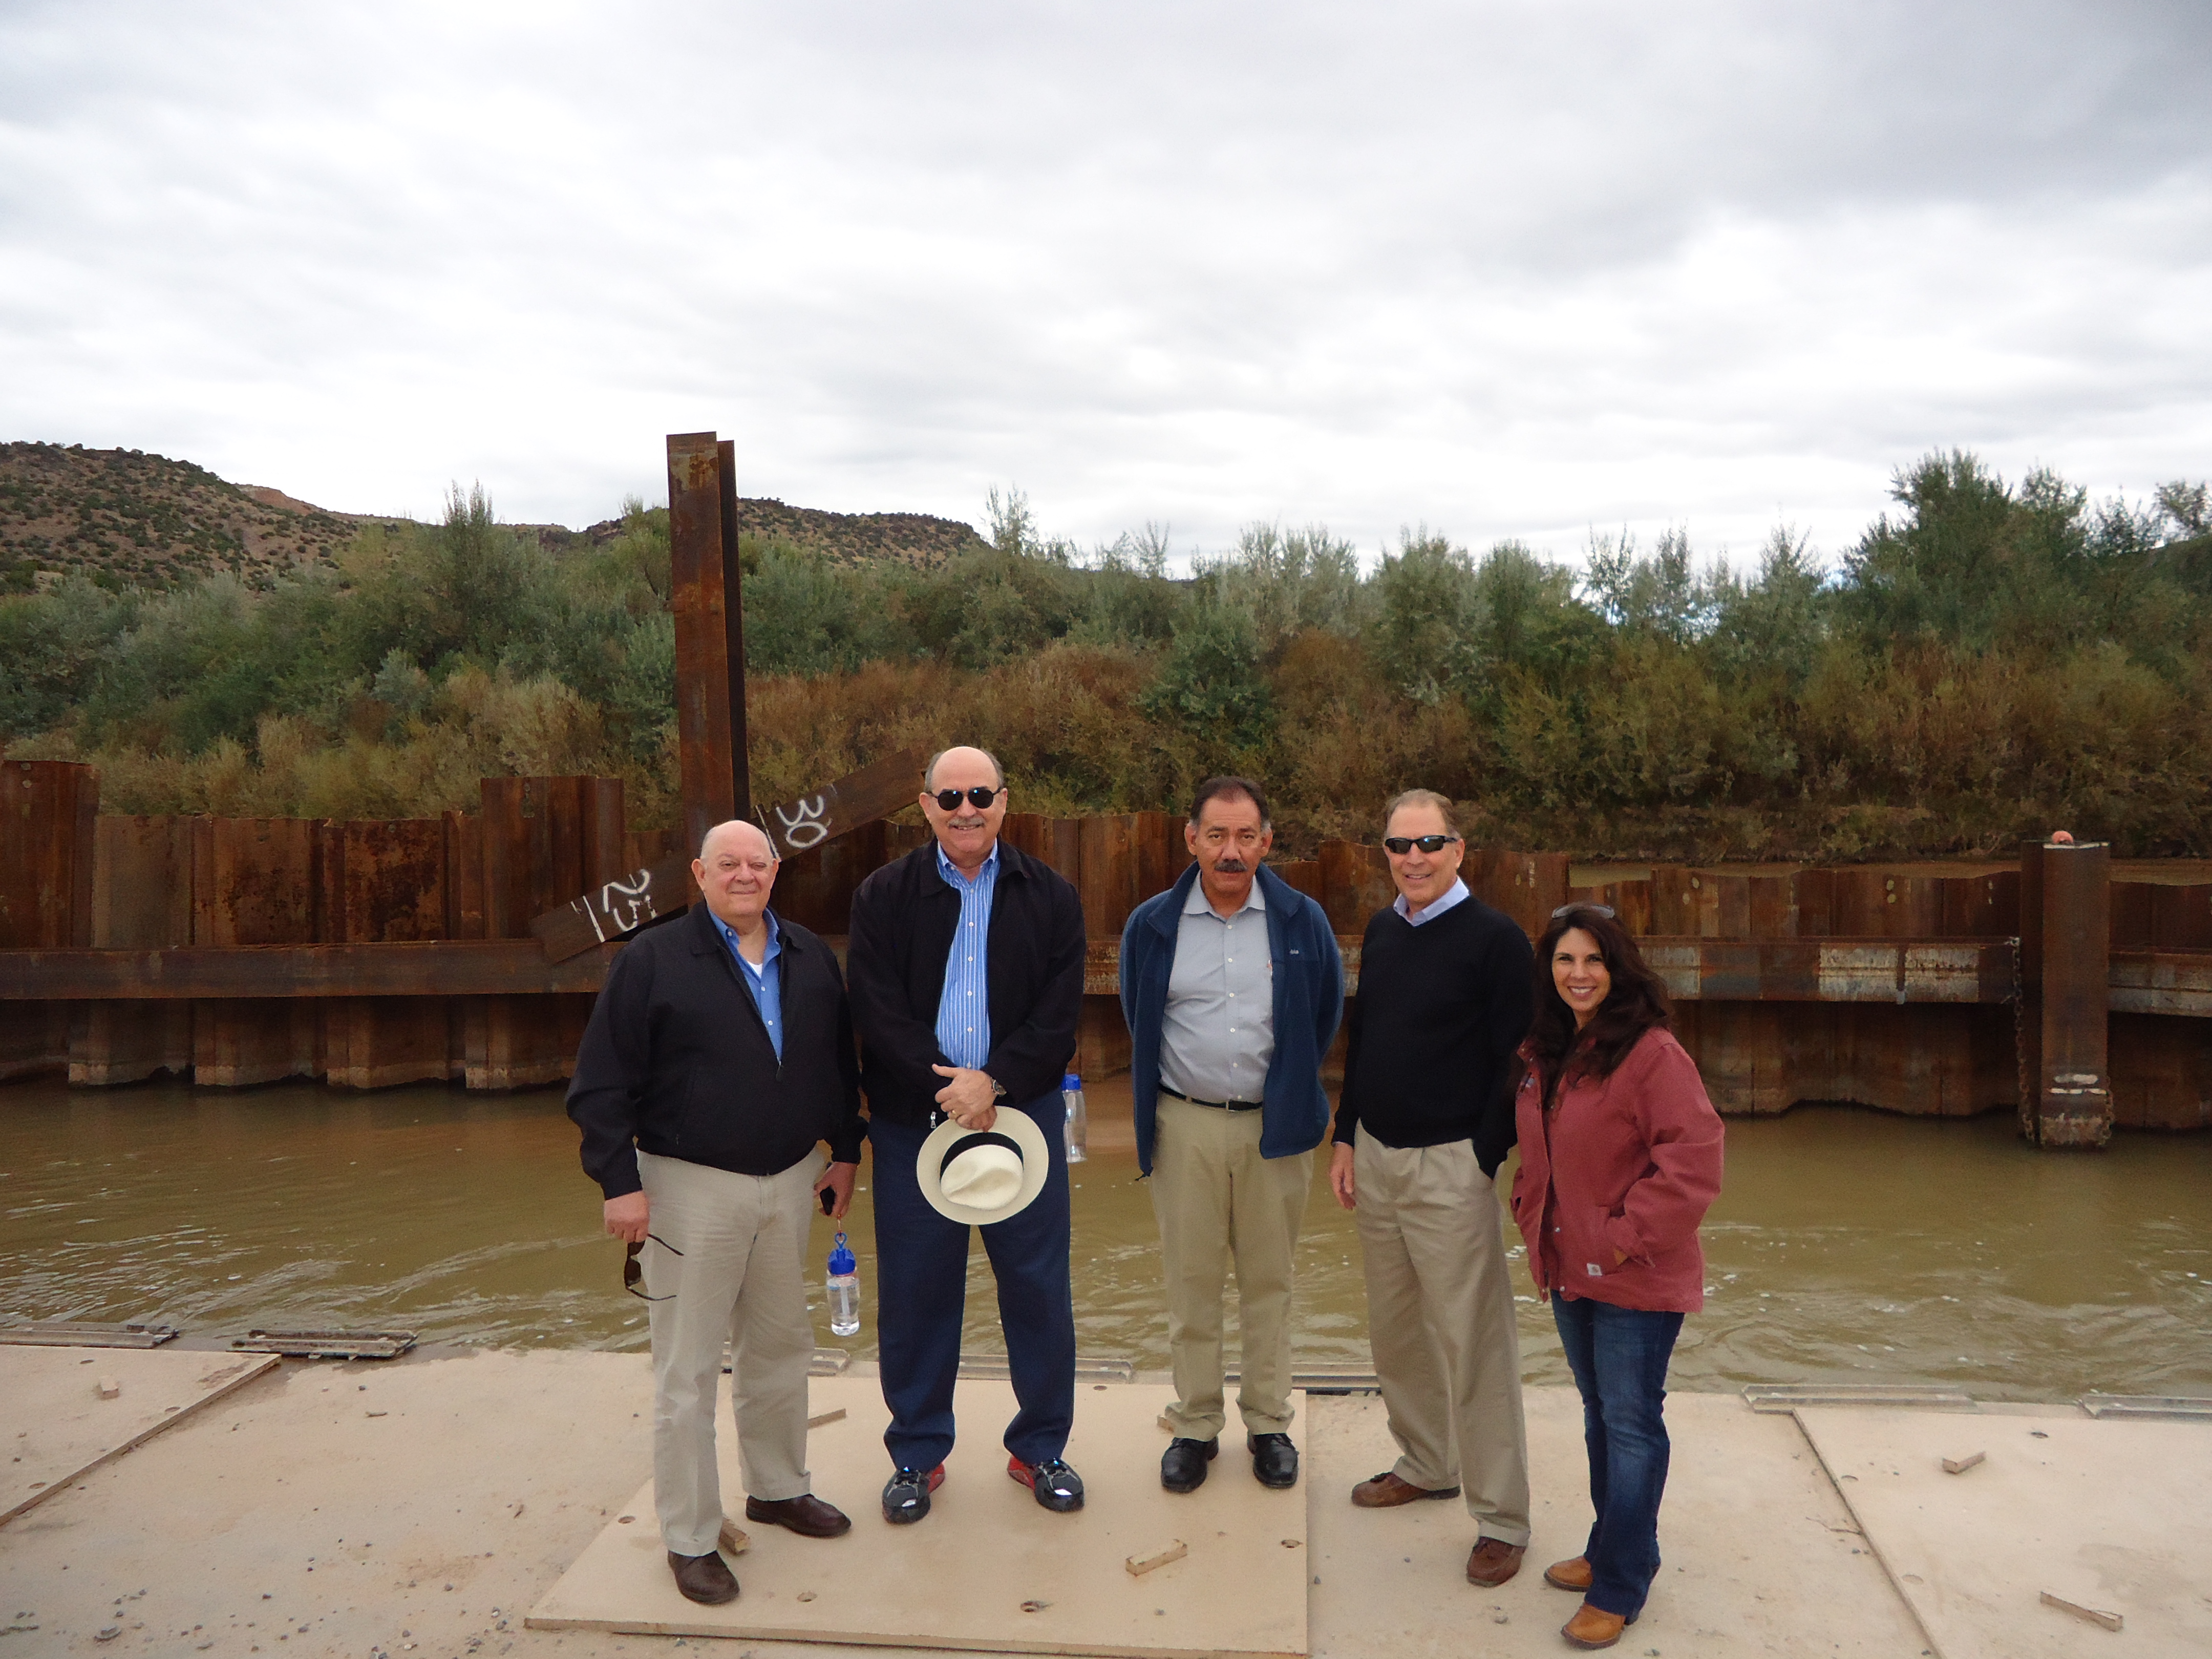 Int'l Boundary Water Commission Tour